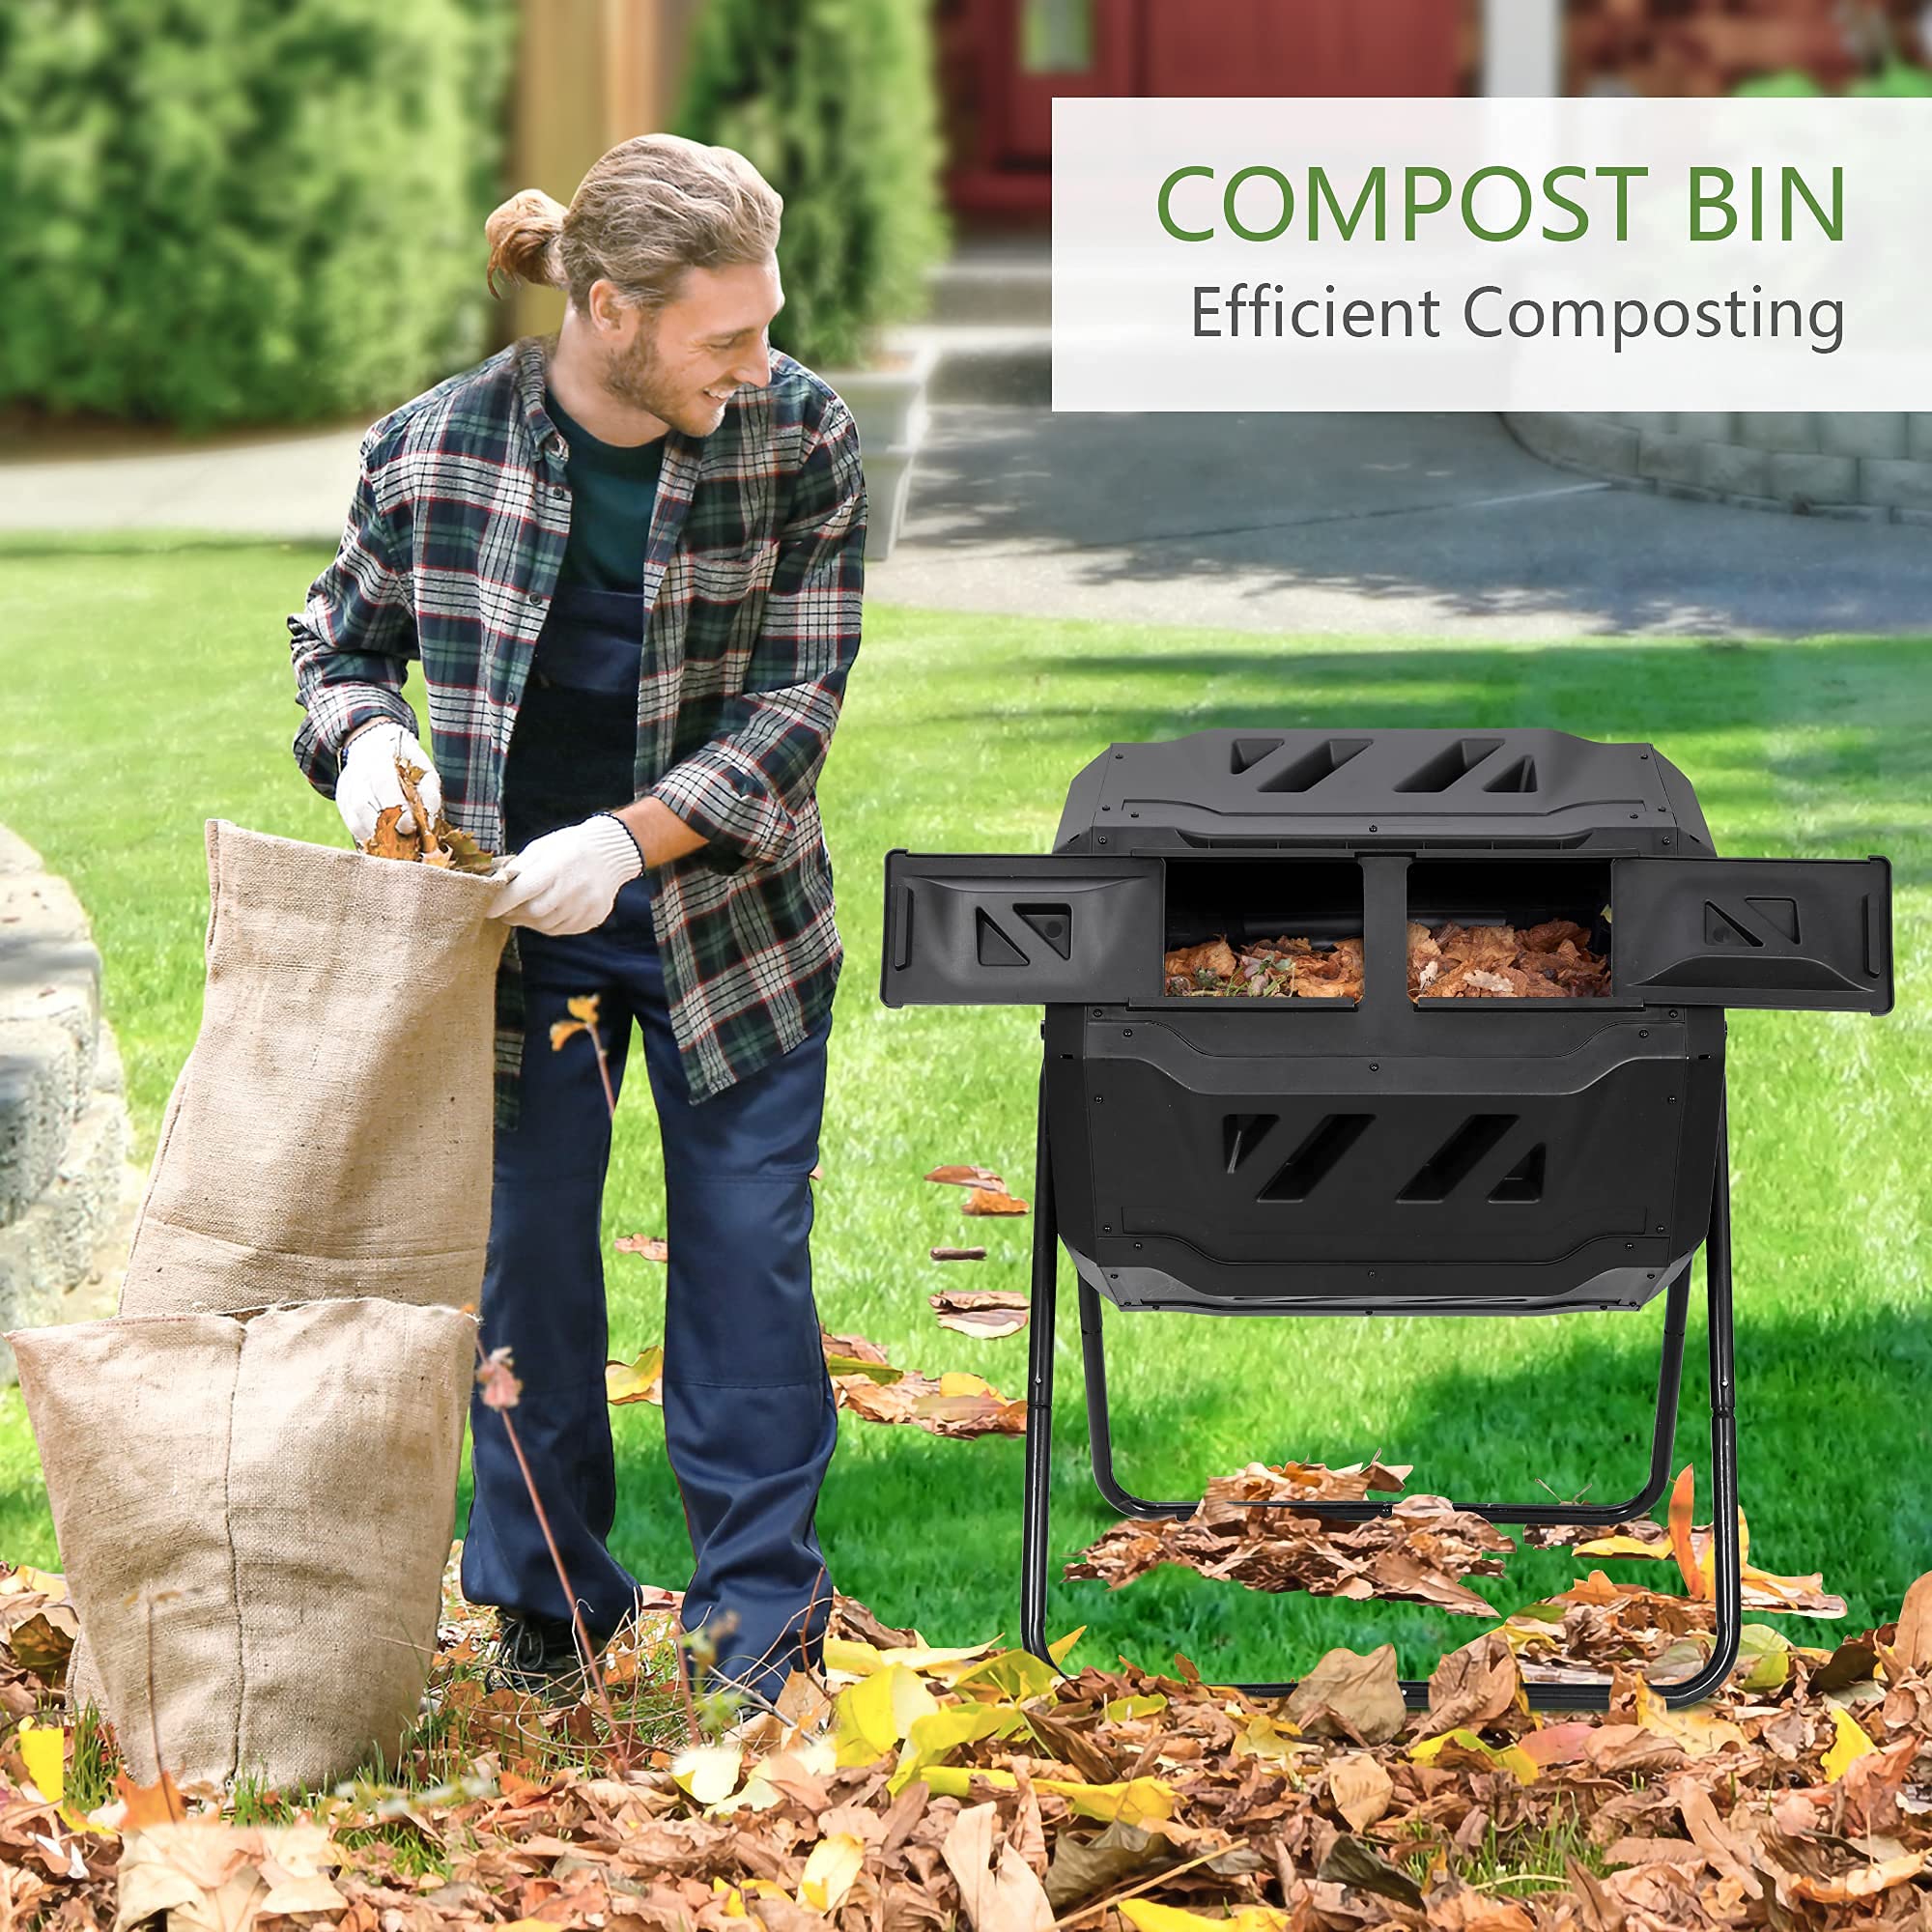 Top 10 questions related to outdoor compost bins